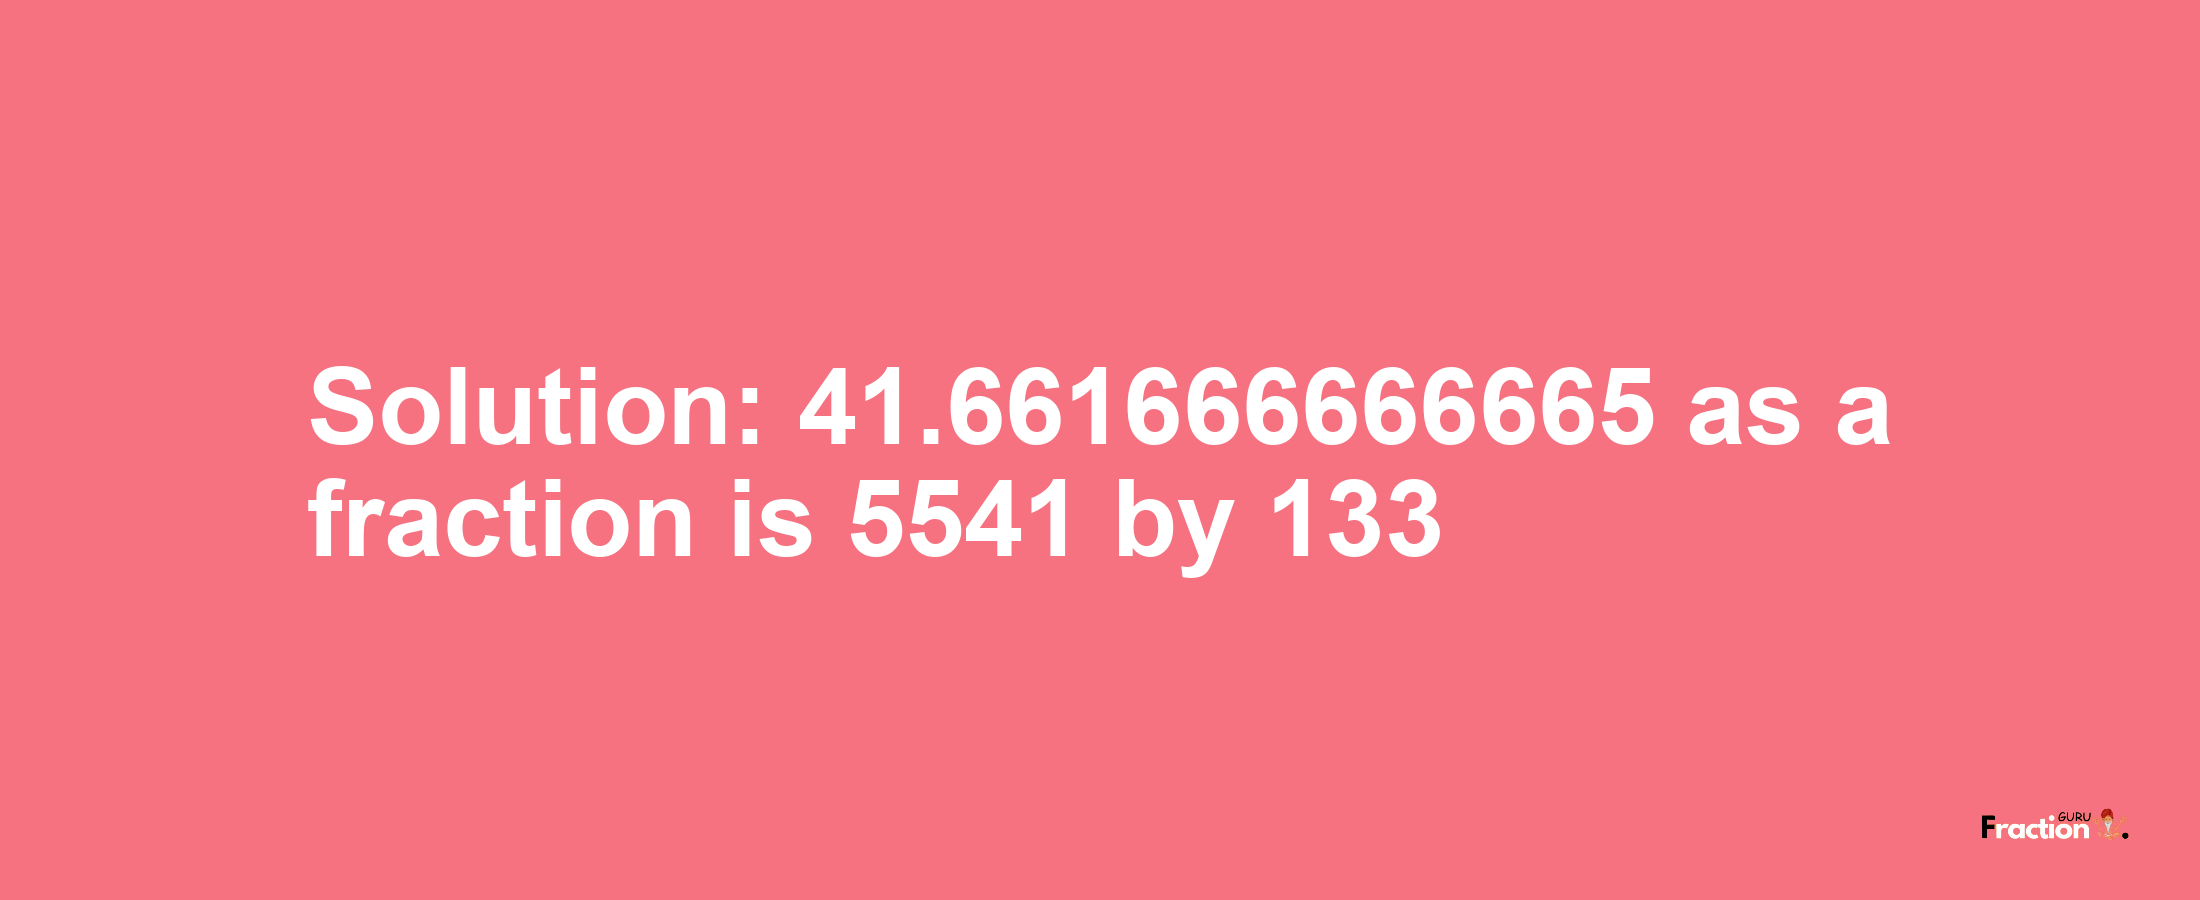 Solution:41.661666666665 as a fraction is 5541/133